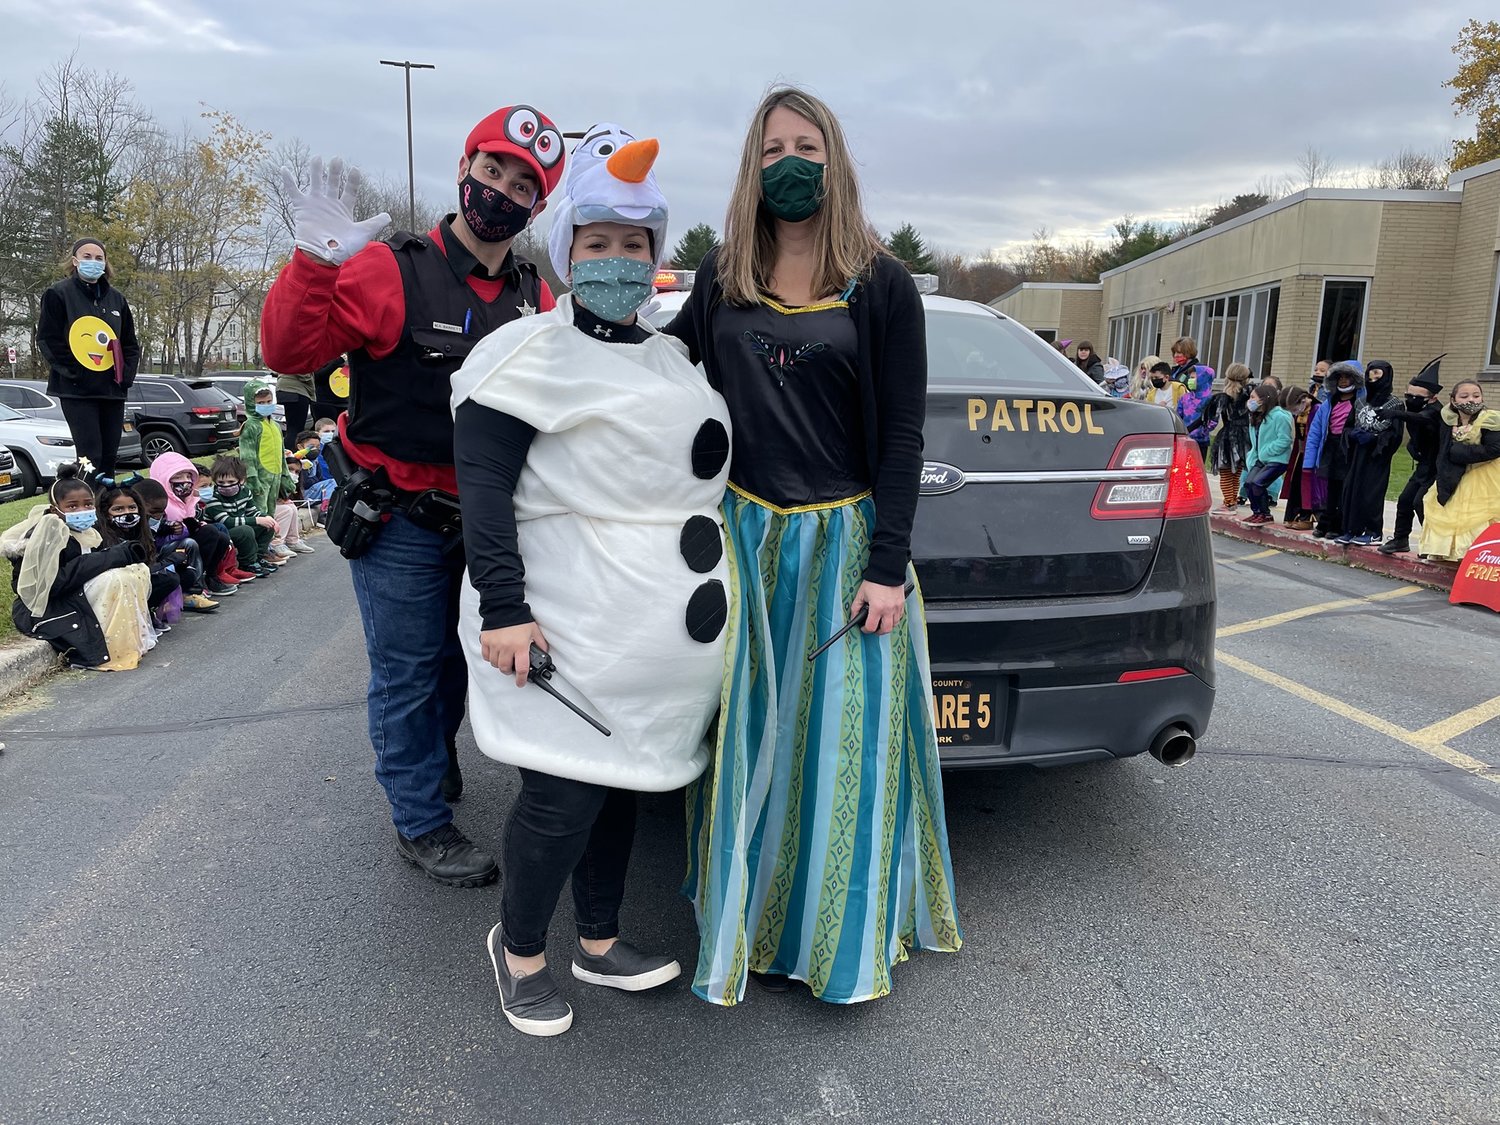 Everyone had fun at last Friday’s Halloween Parade for the Monticello Central School District, including the ‘Big Kids.’ Here's School Resource Officer Deputy Michael Barret as "Mario", left, Cooke Assistant Principal Sarah Mootz as "Olaf" and Cooke Principal Virginia Gallet as "Anna.